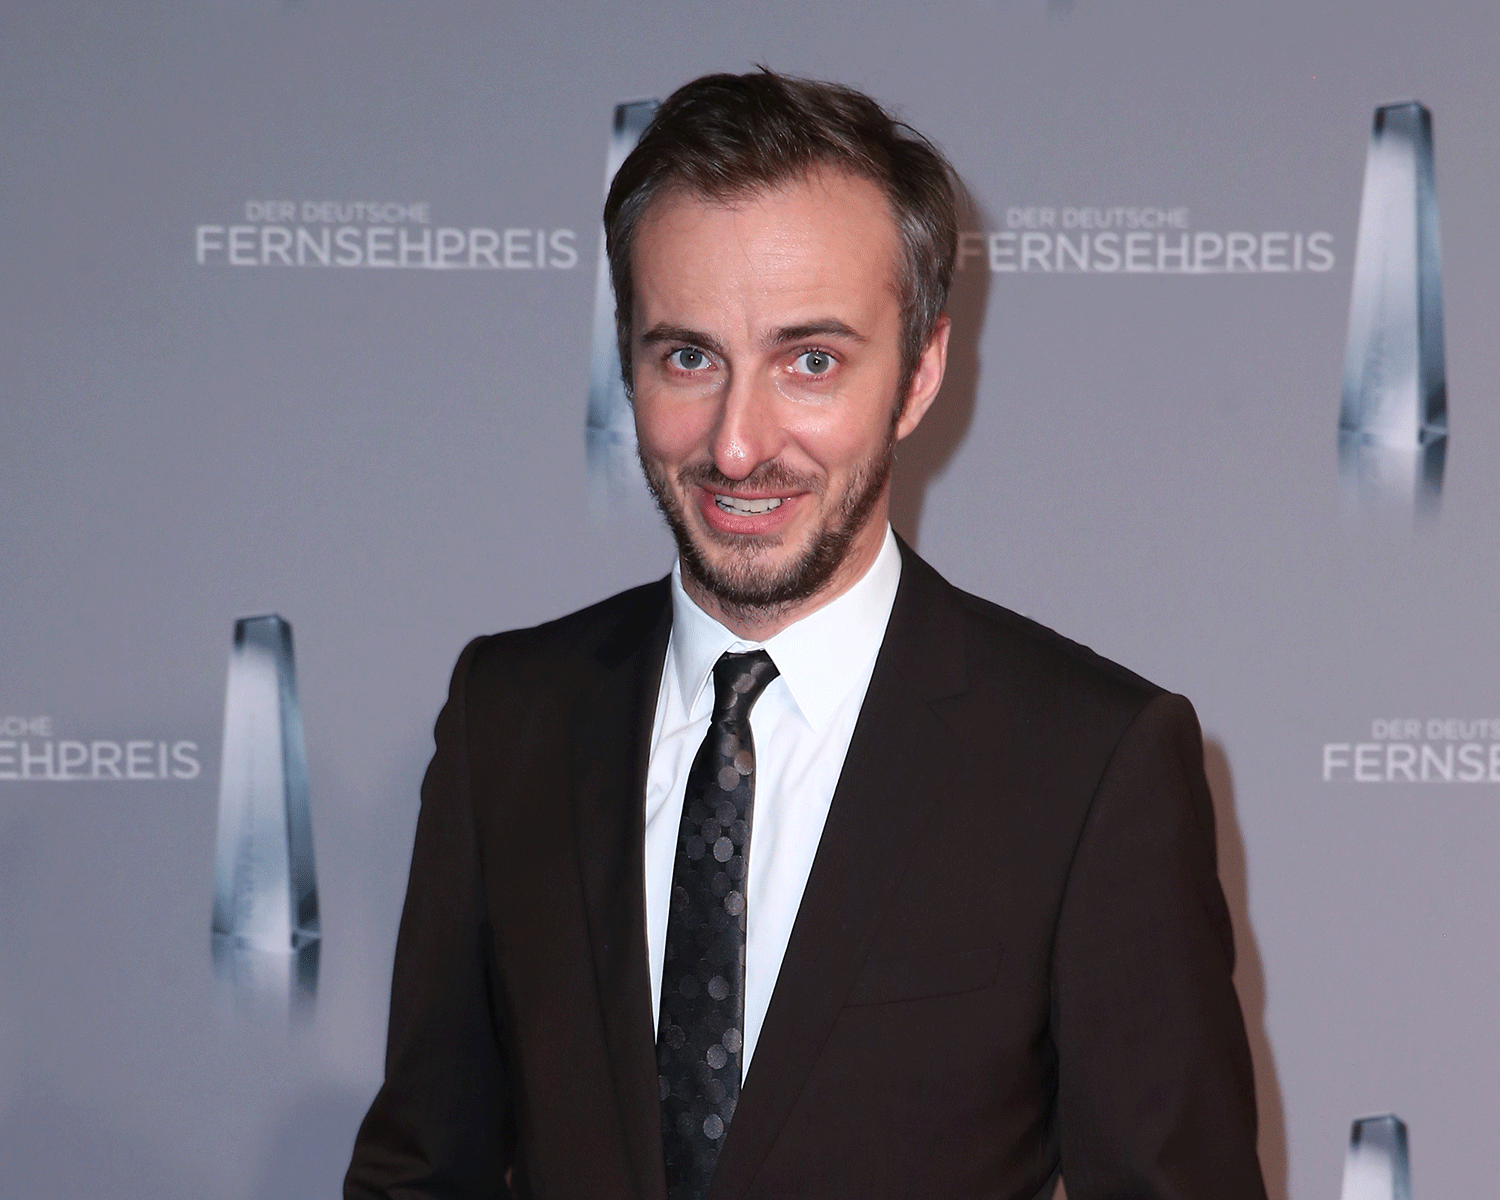 Jan Bohmermann's poem was called a "deliberate insult" by Chancellor Angela Merkel